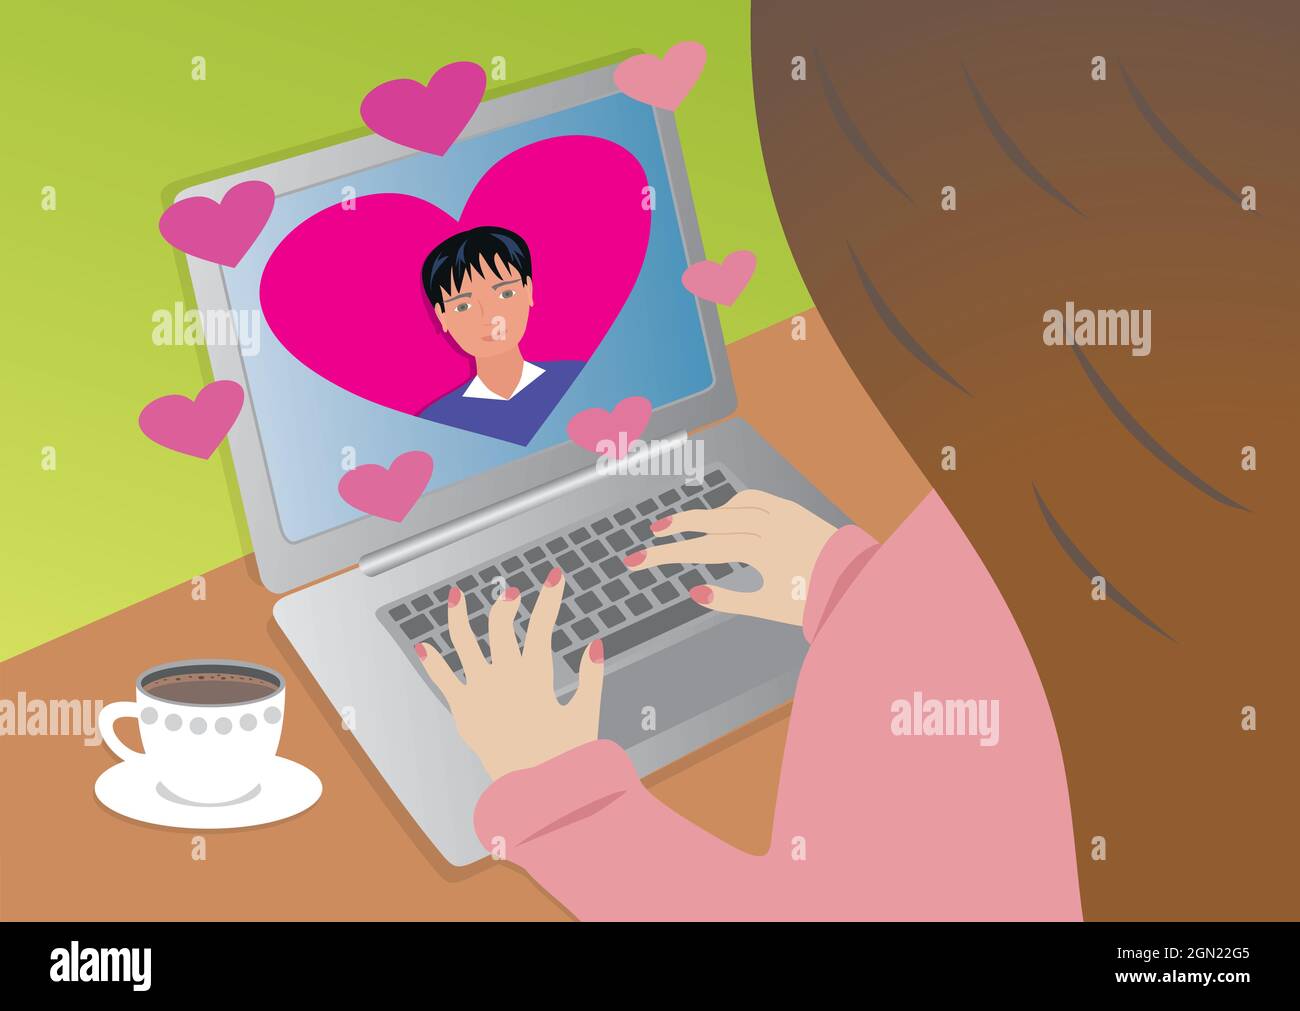 Finding love online. Woman falling in love with man. Sitting chatting on laptop. Vector illustration. EPS10. Stock Vector